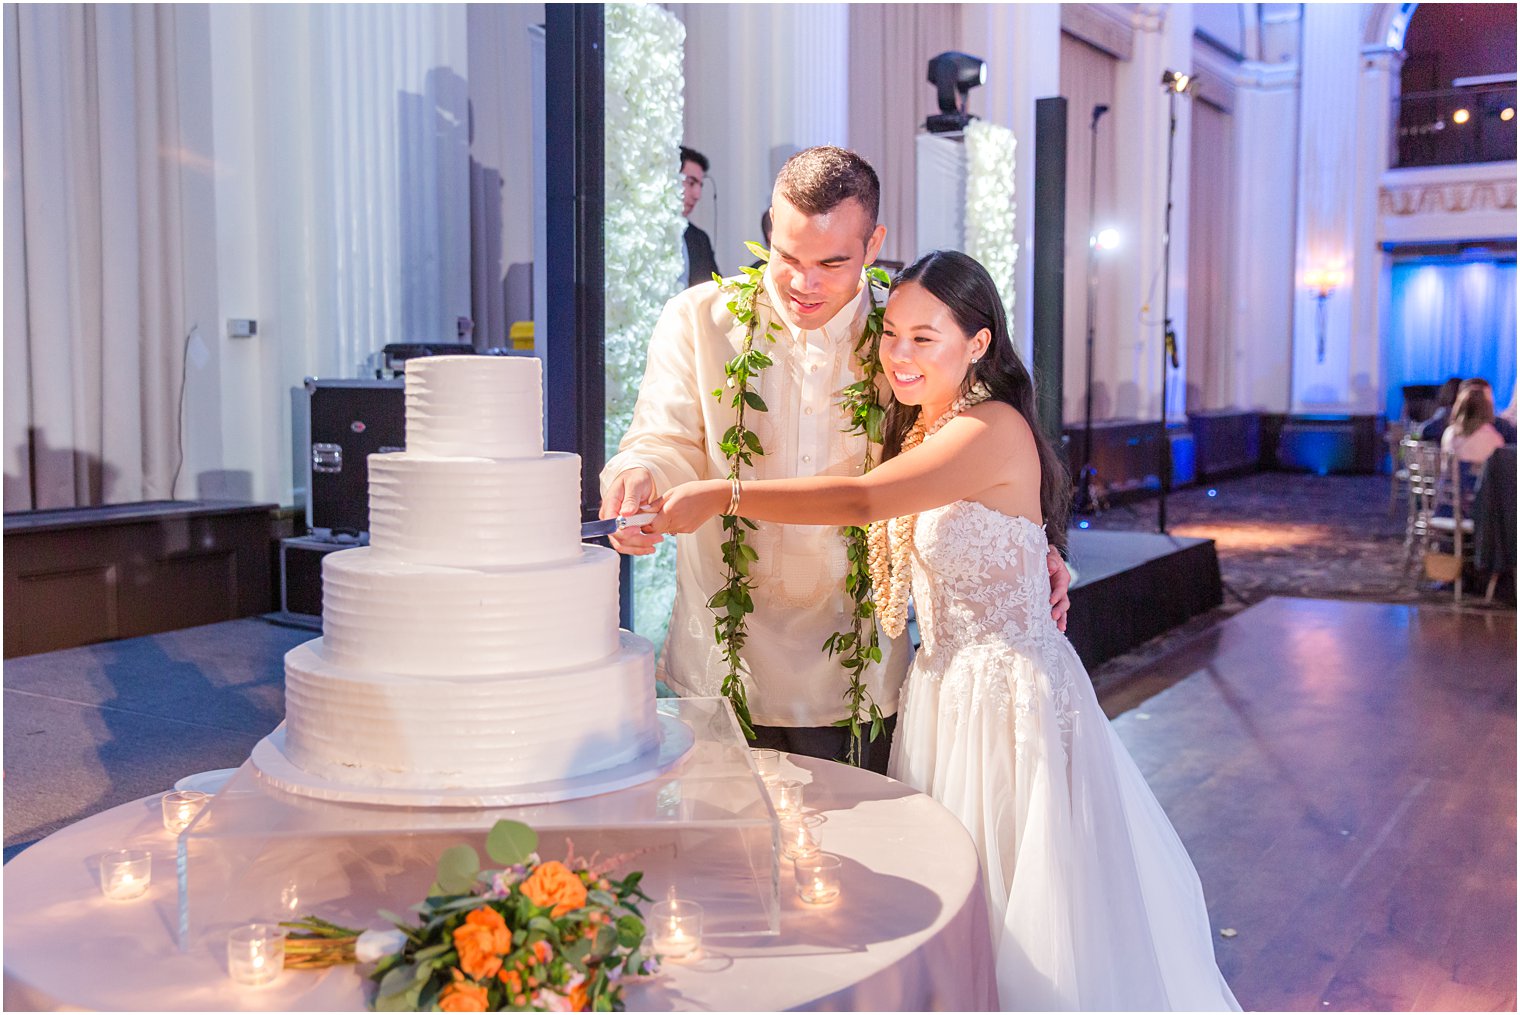 bride and groom cut wedding cake during Philly PA wedding reception